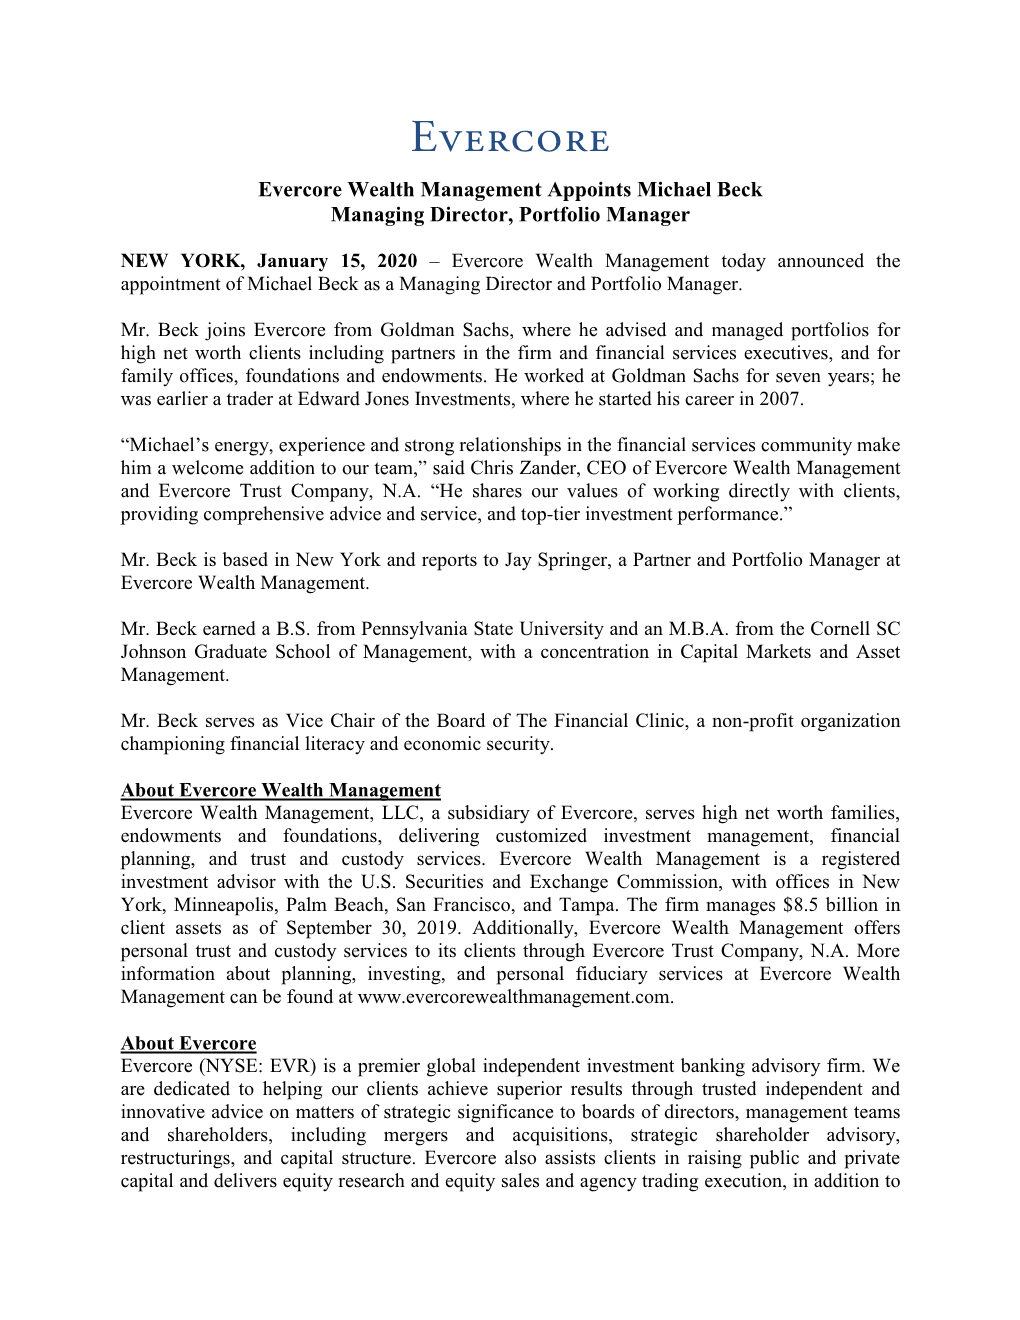 Evercore Wealth Management Appoints Michael Beck Managing Director, Portfolio Manager